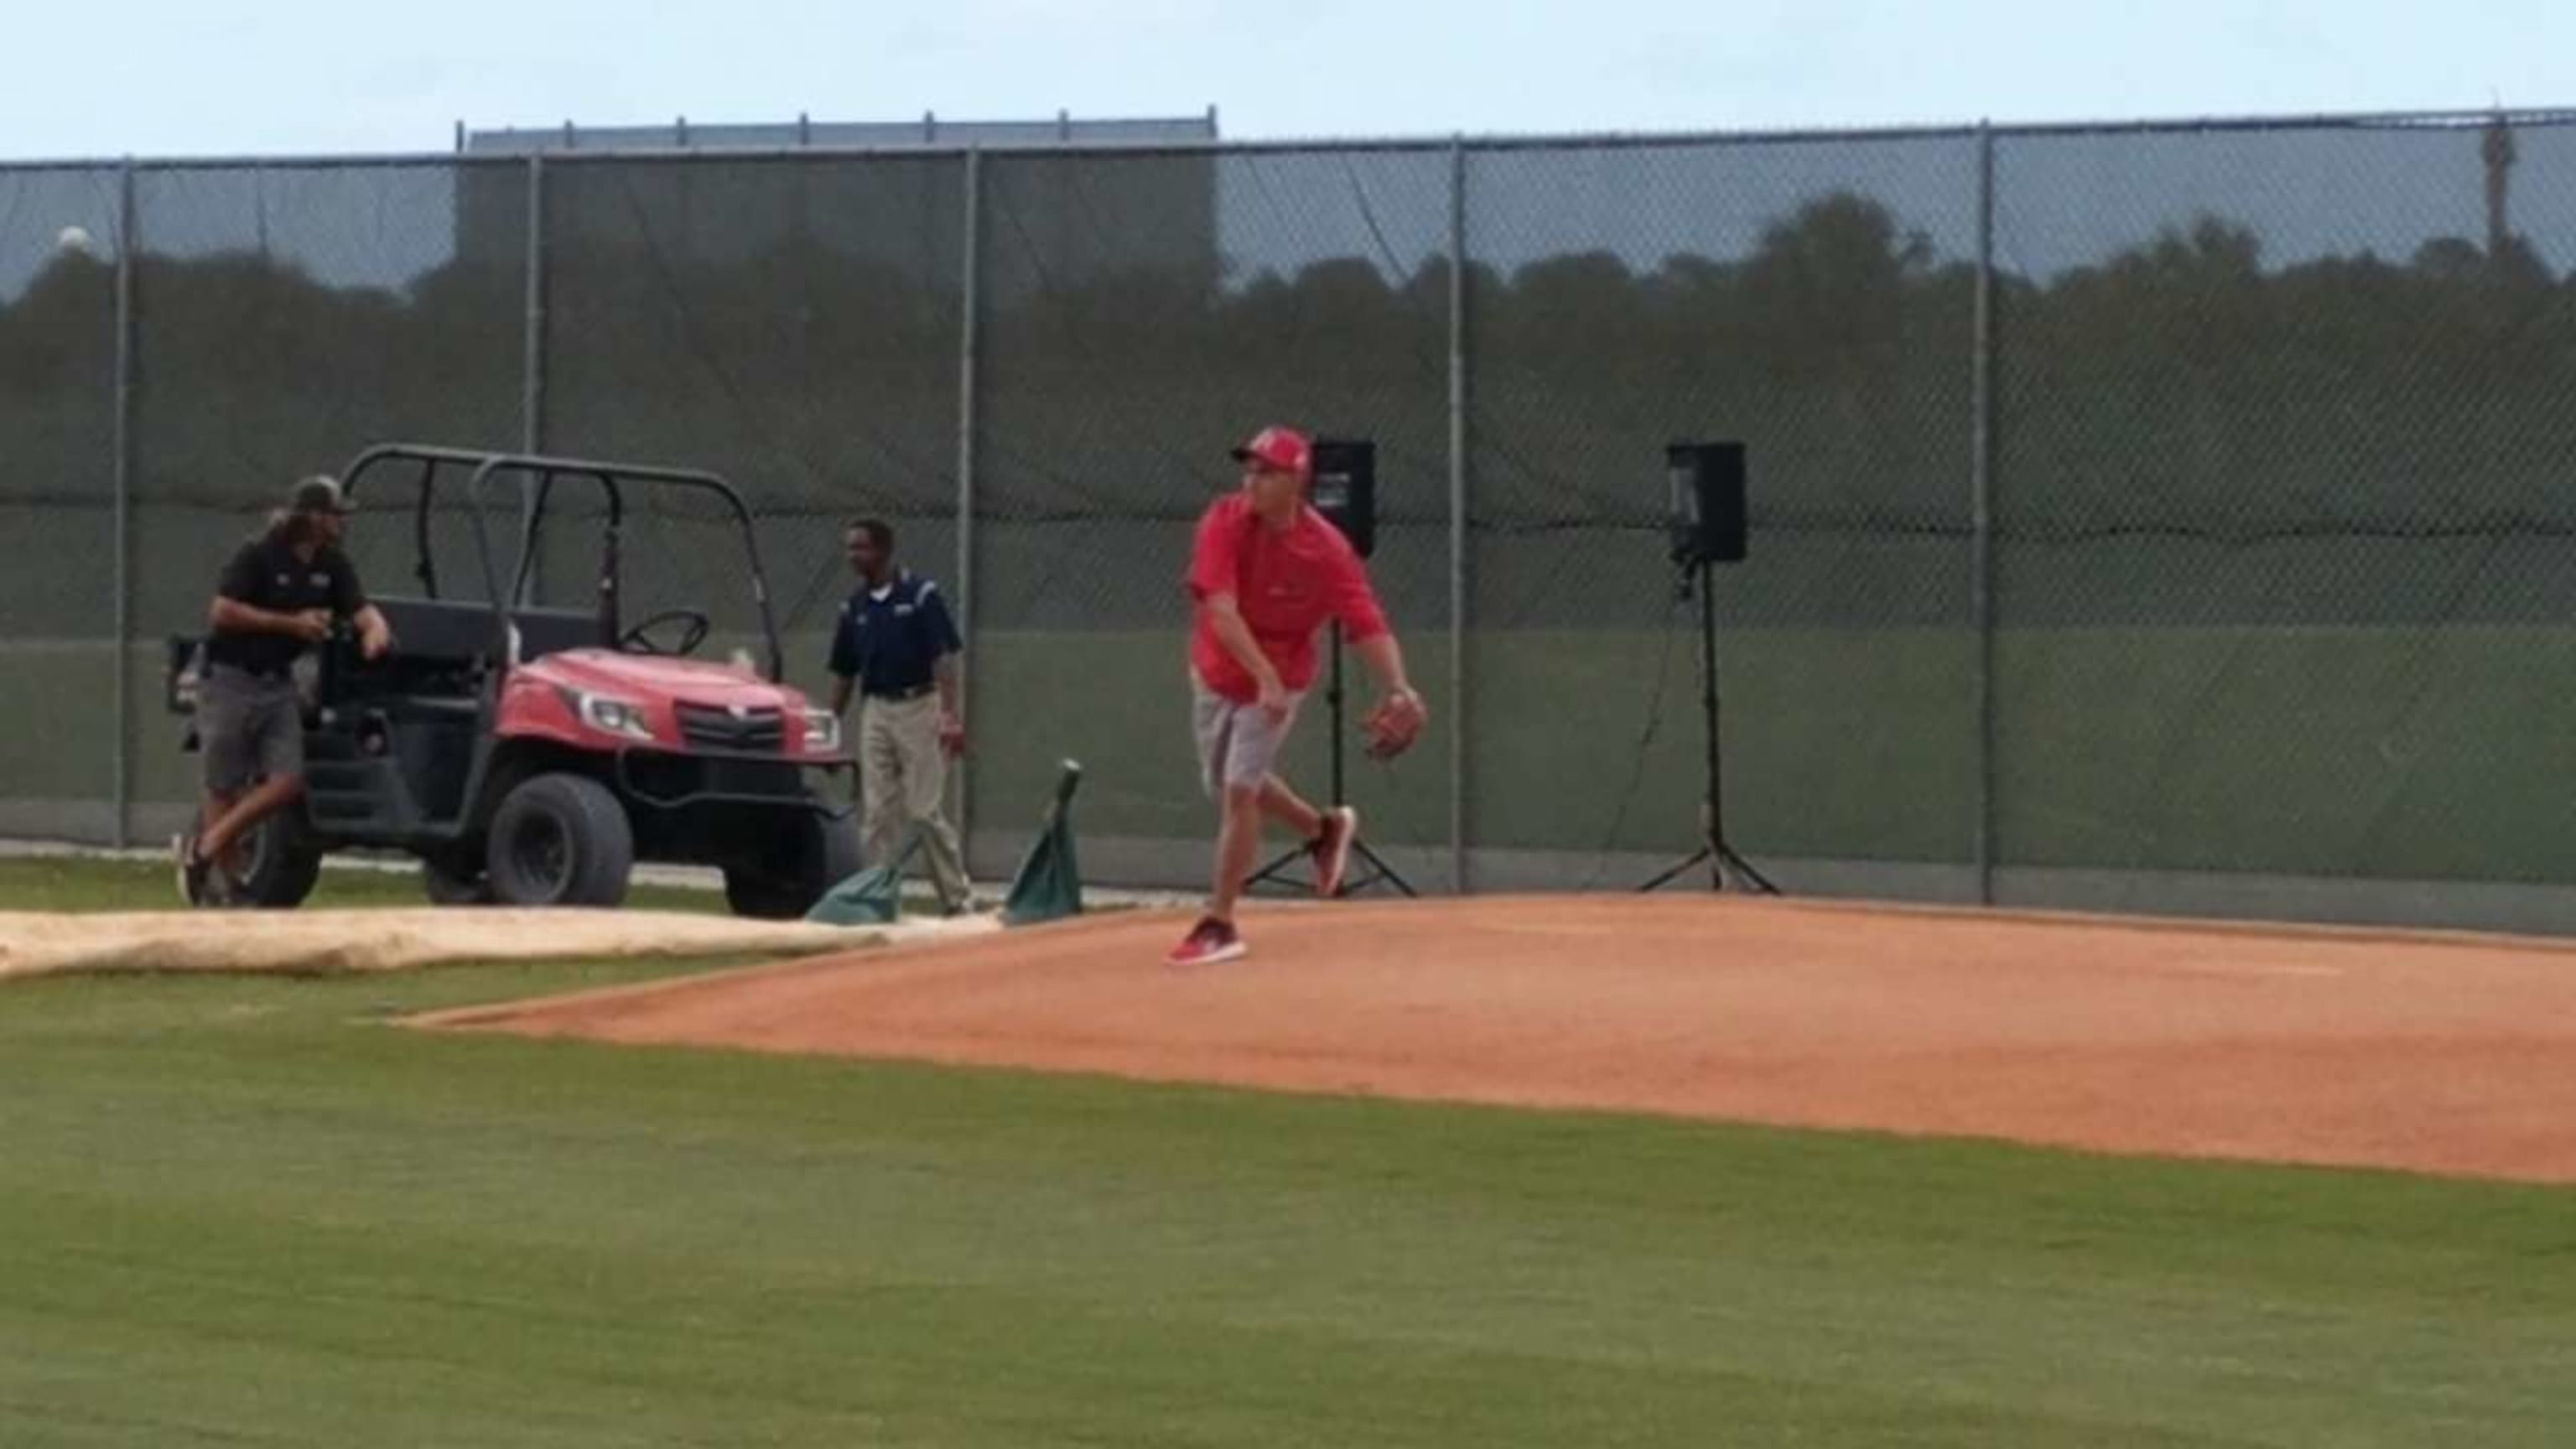 Rickie Fowler rolled up to Cardinals camp in his Ferrari to throw